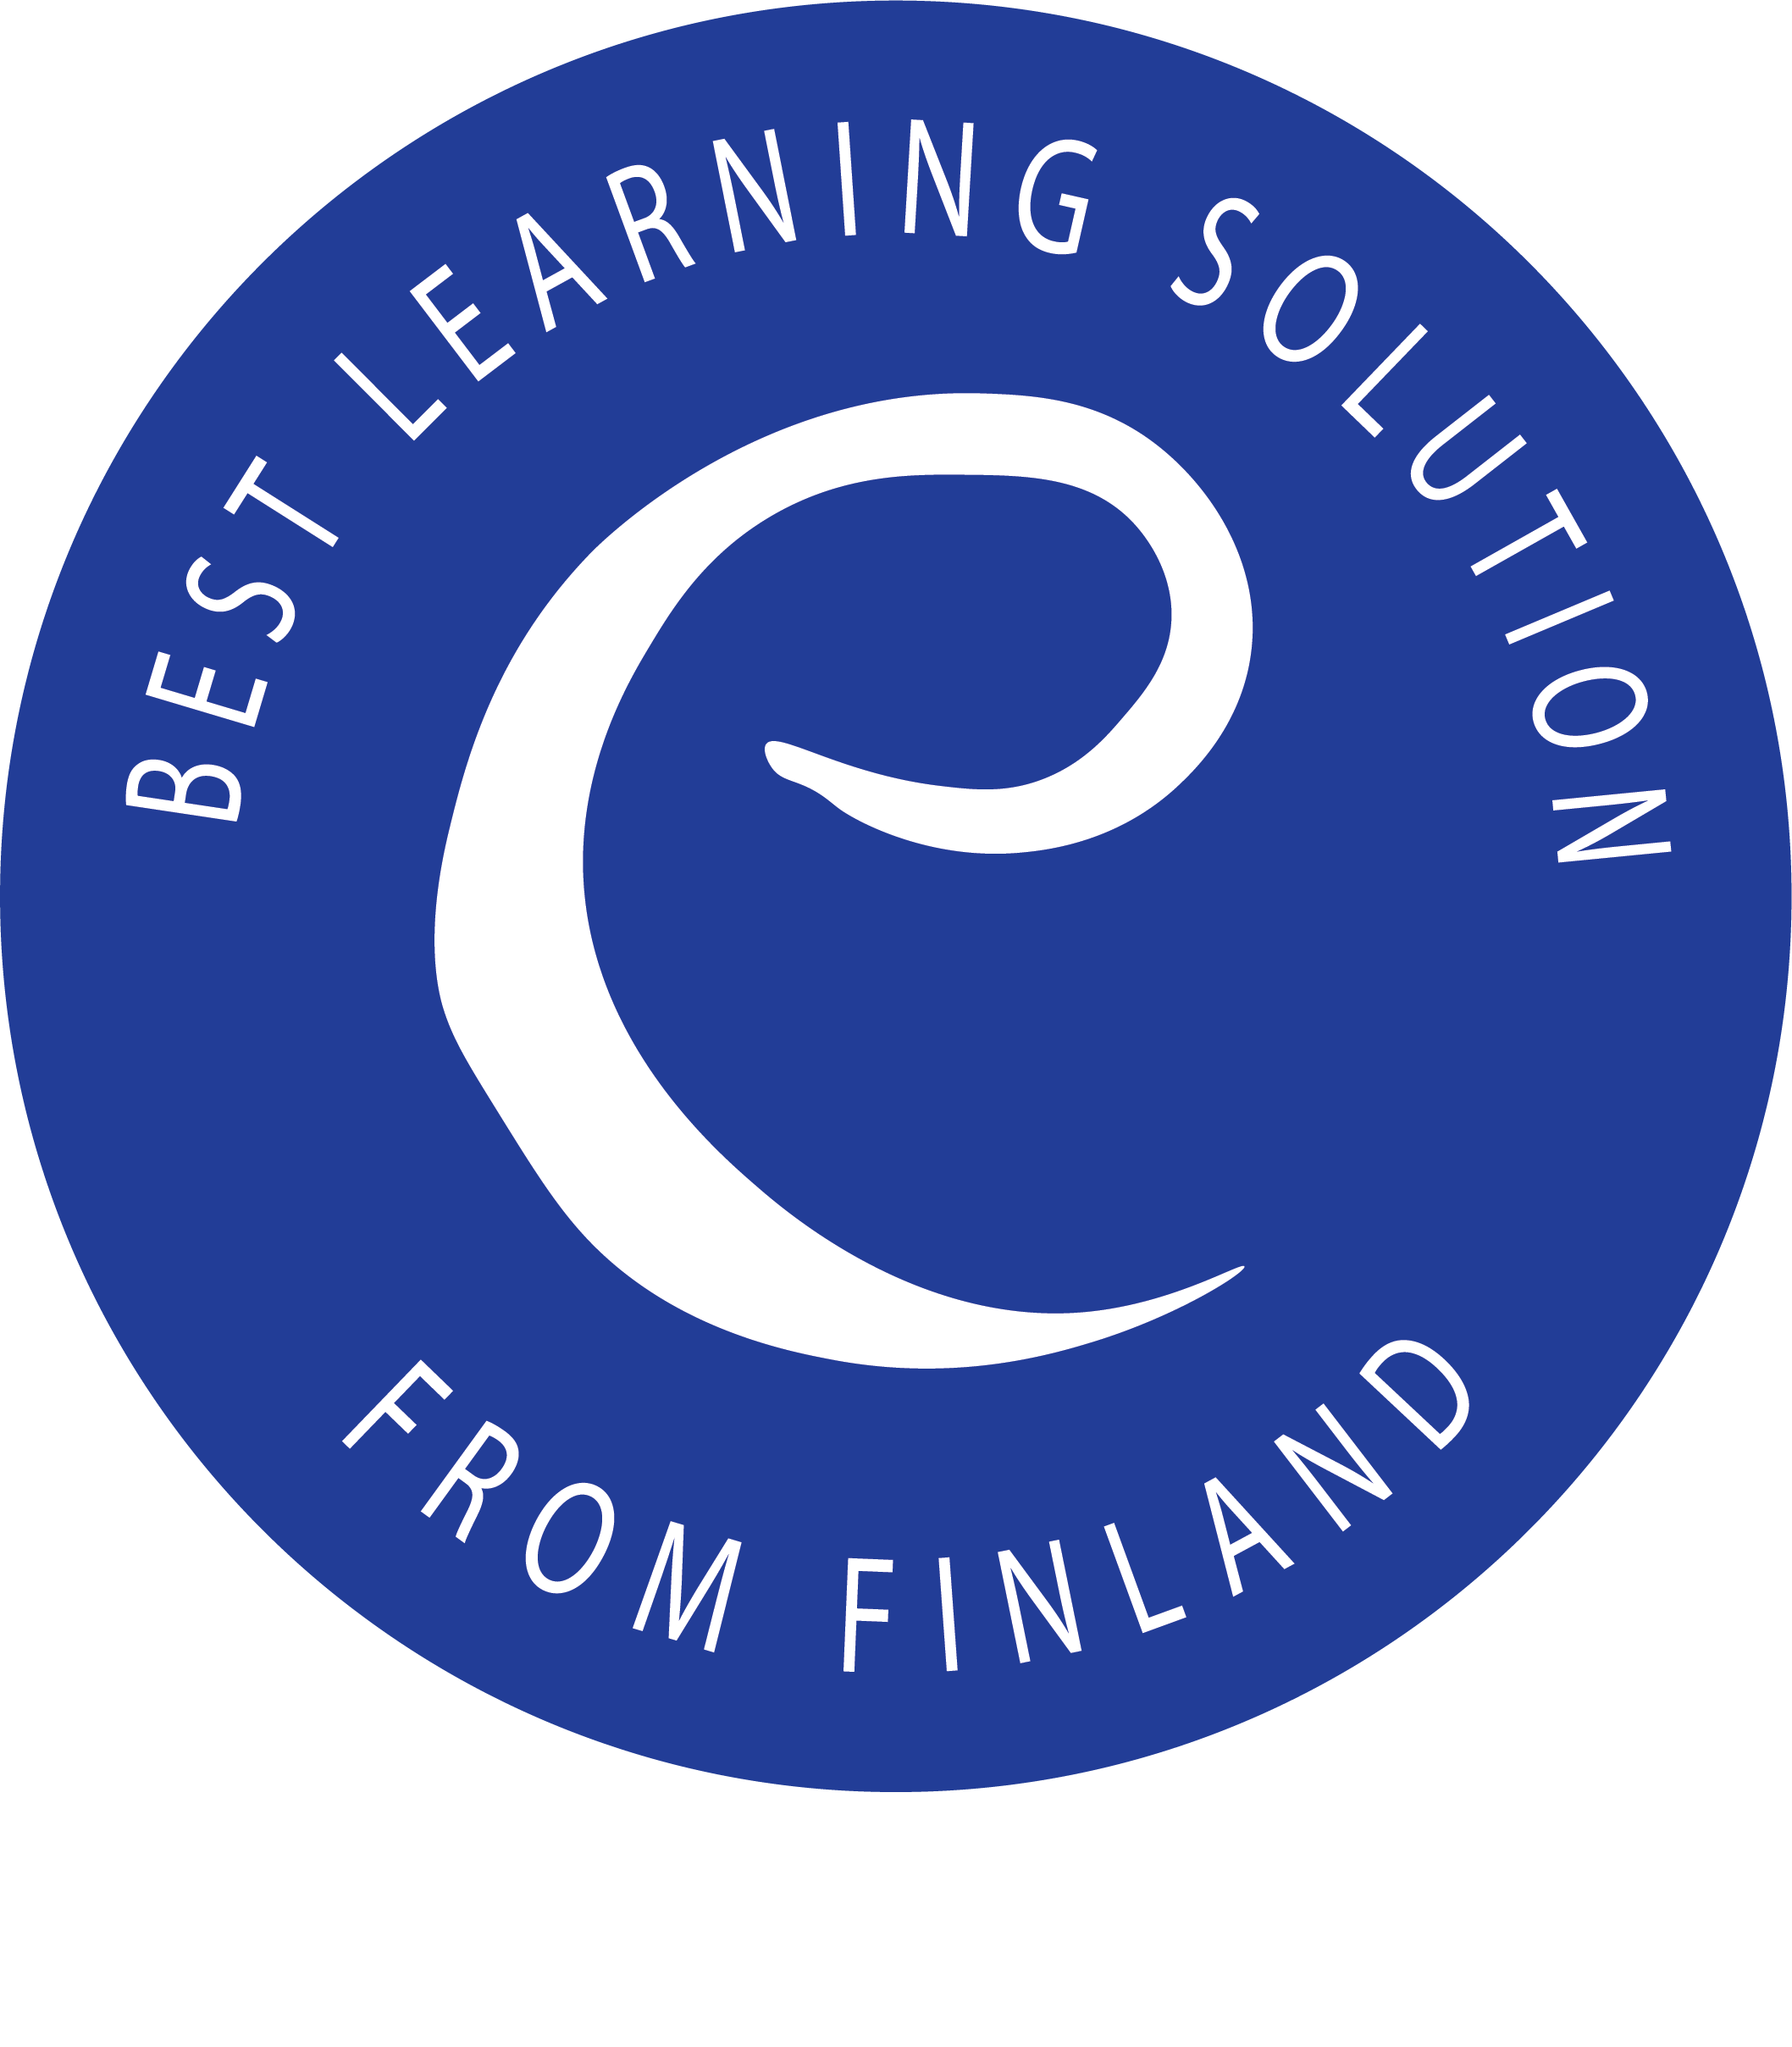 Best Education From Finland